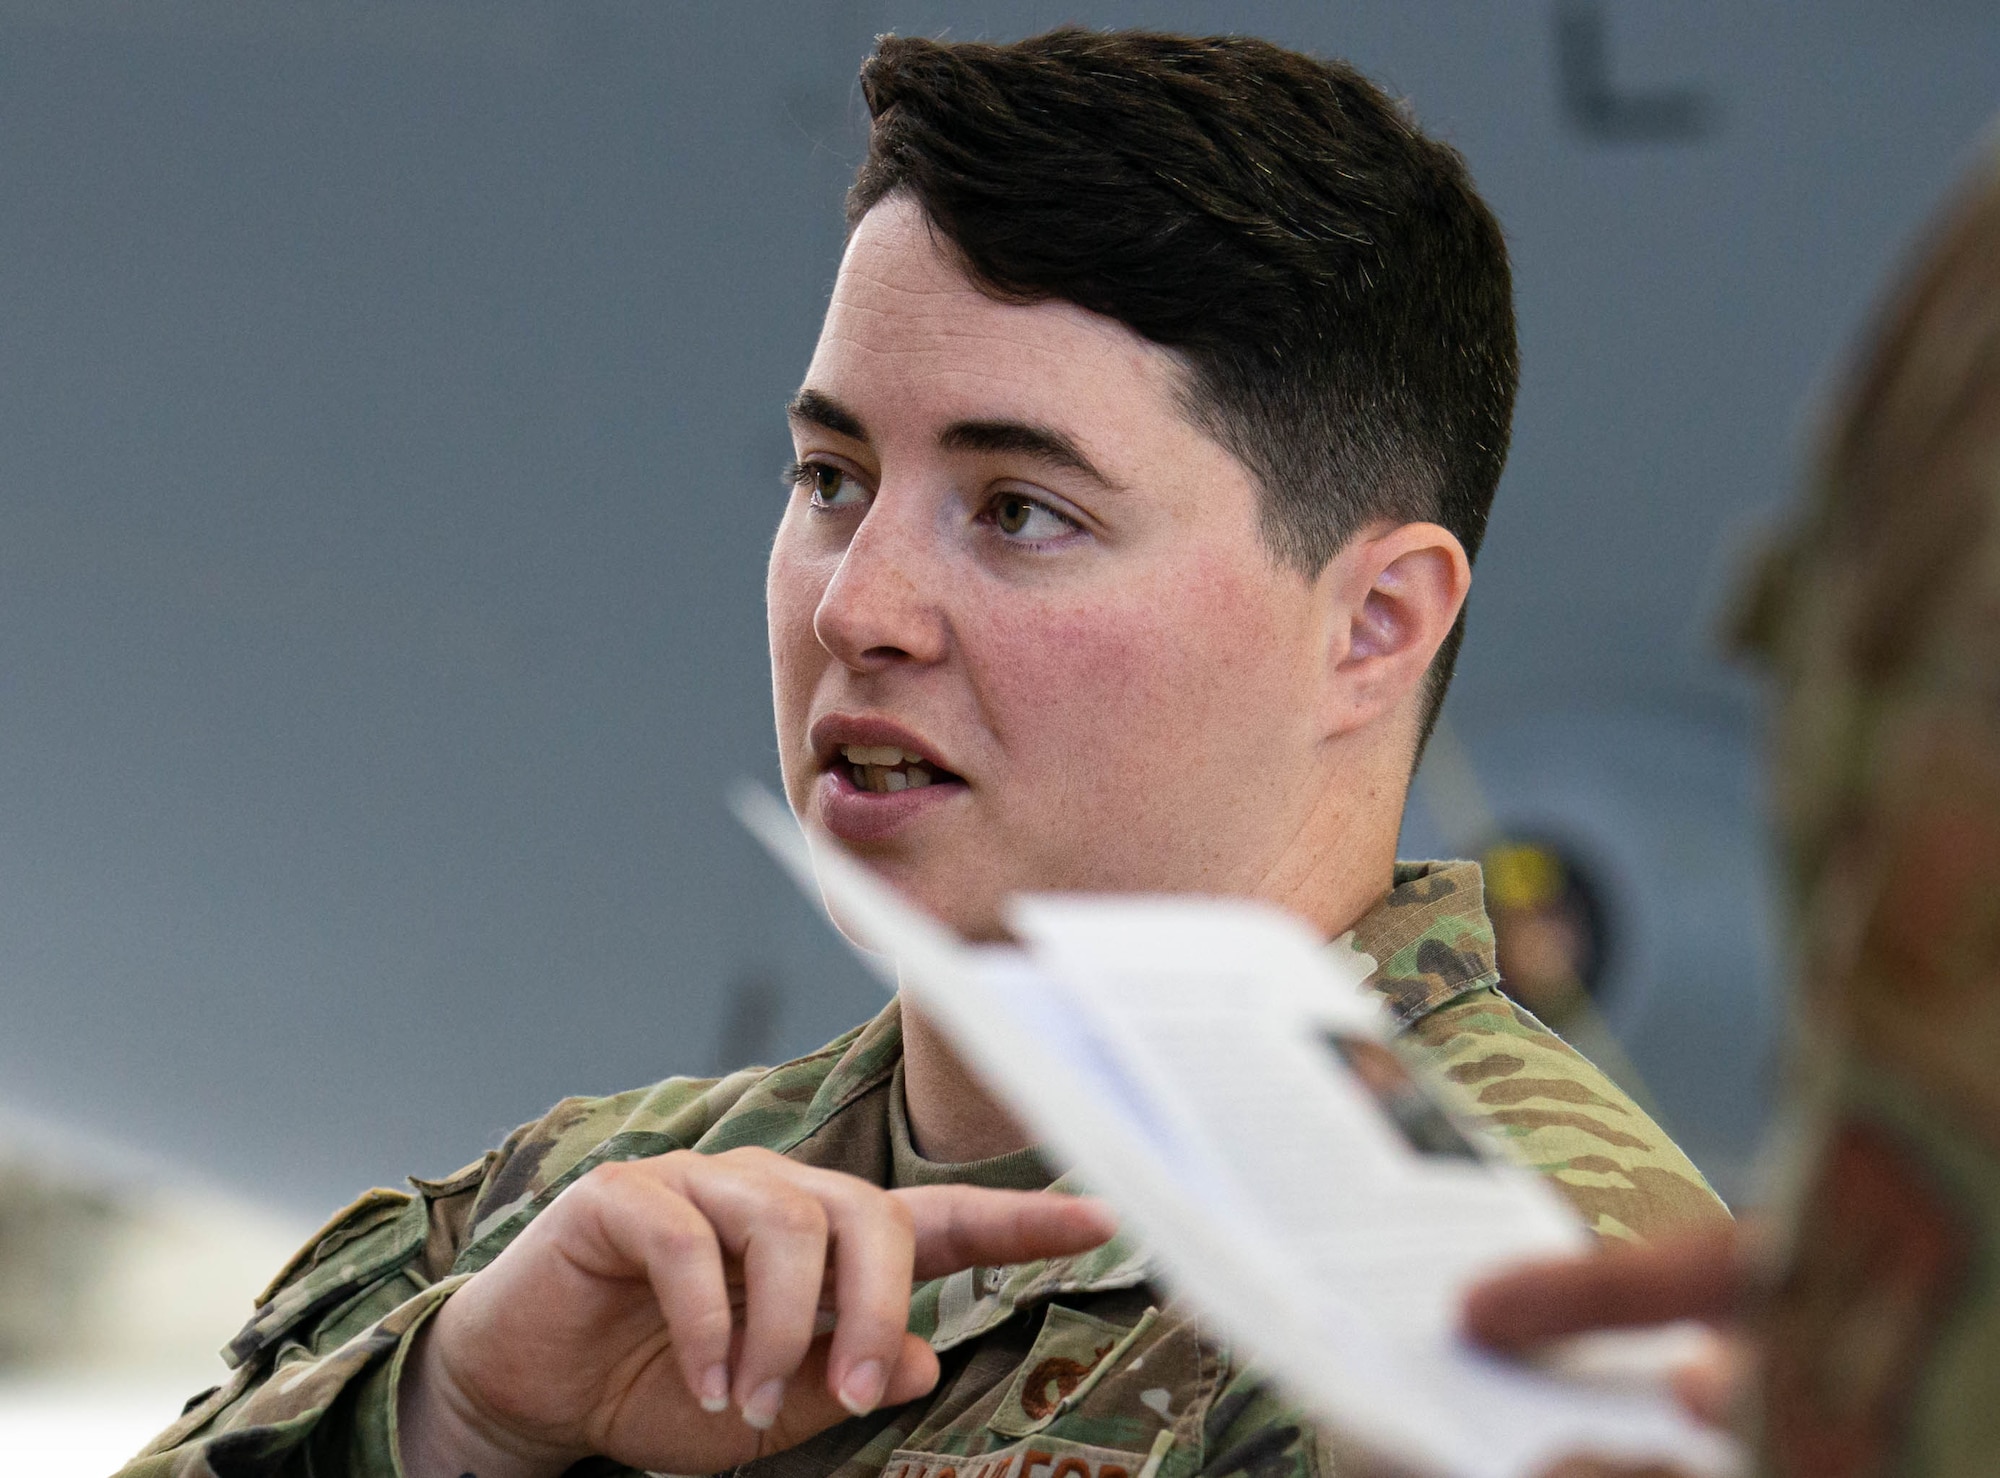 Tech. Sgt. Savanna Hudnall instructs Airmen on proper procedures during a change of command ceremony practice